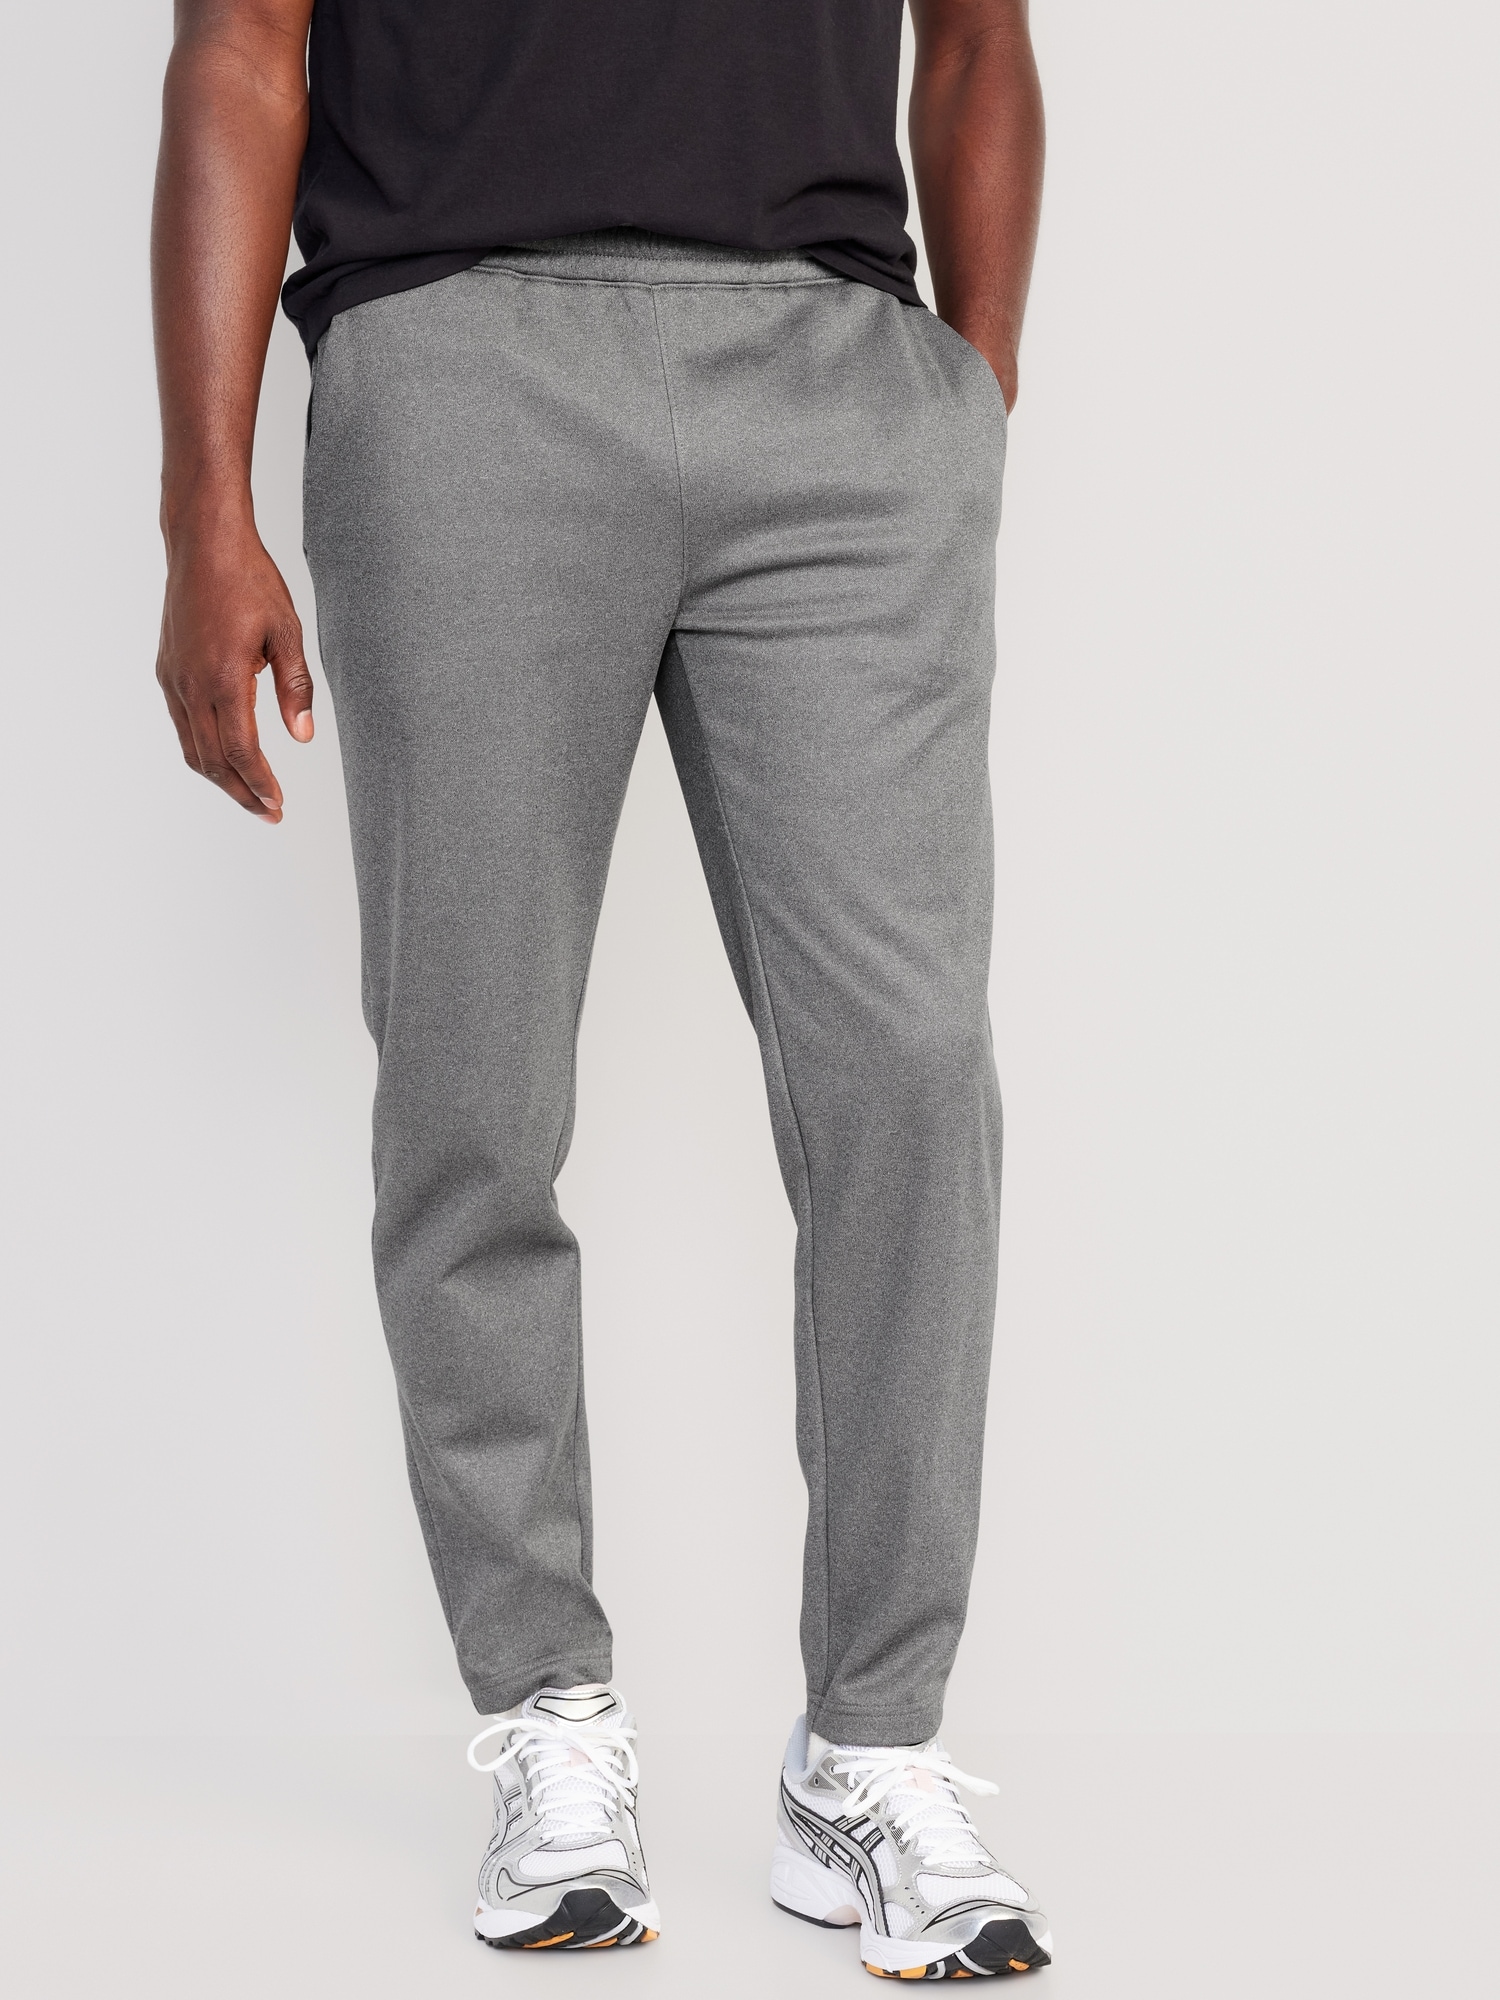 ON Tapered Sweatpants